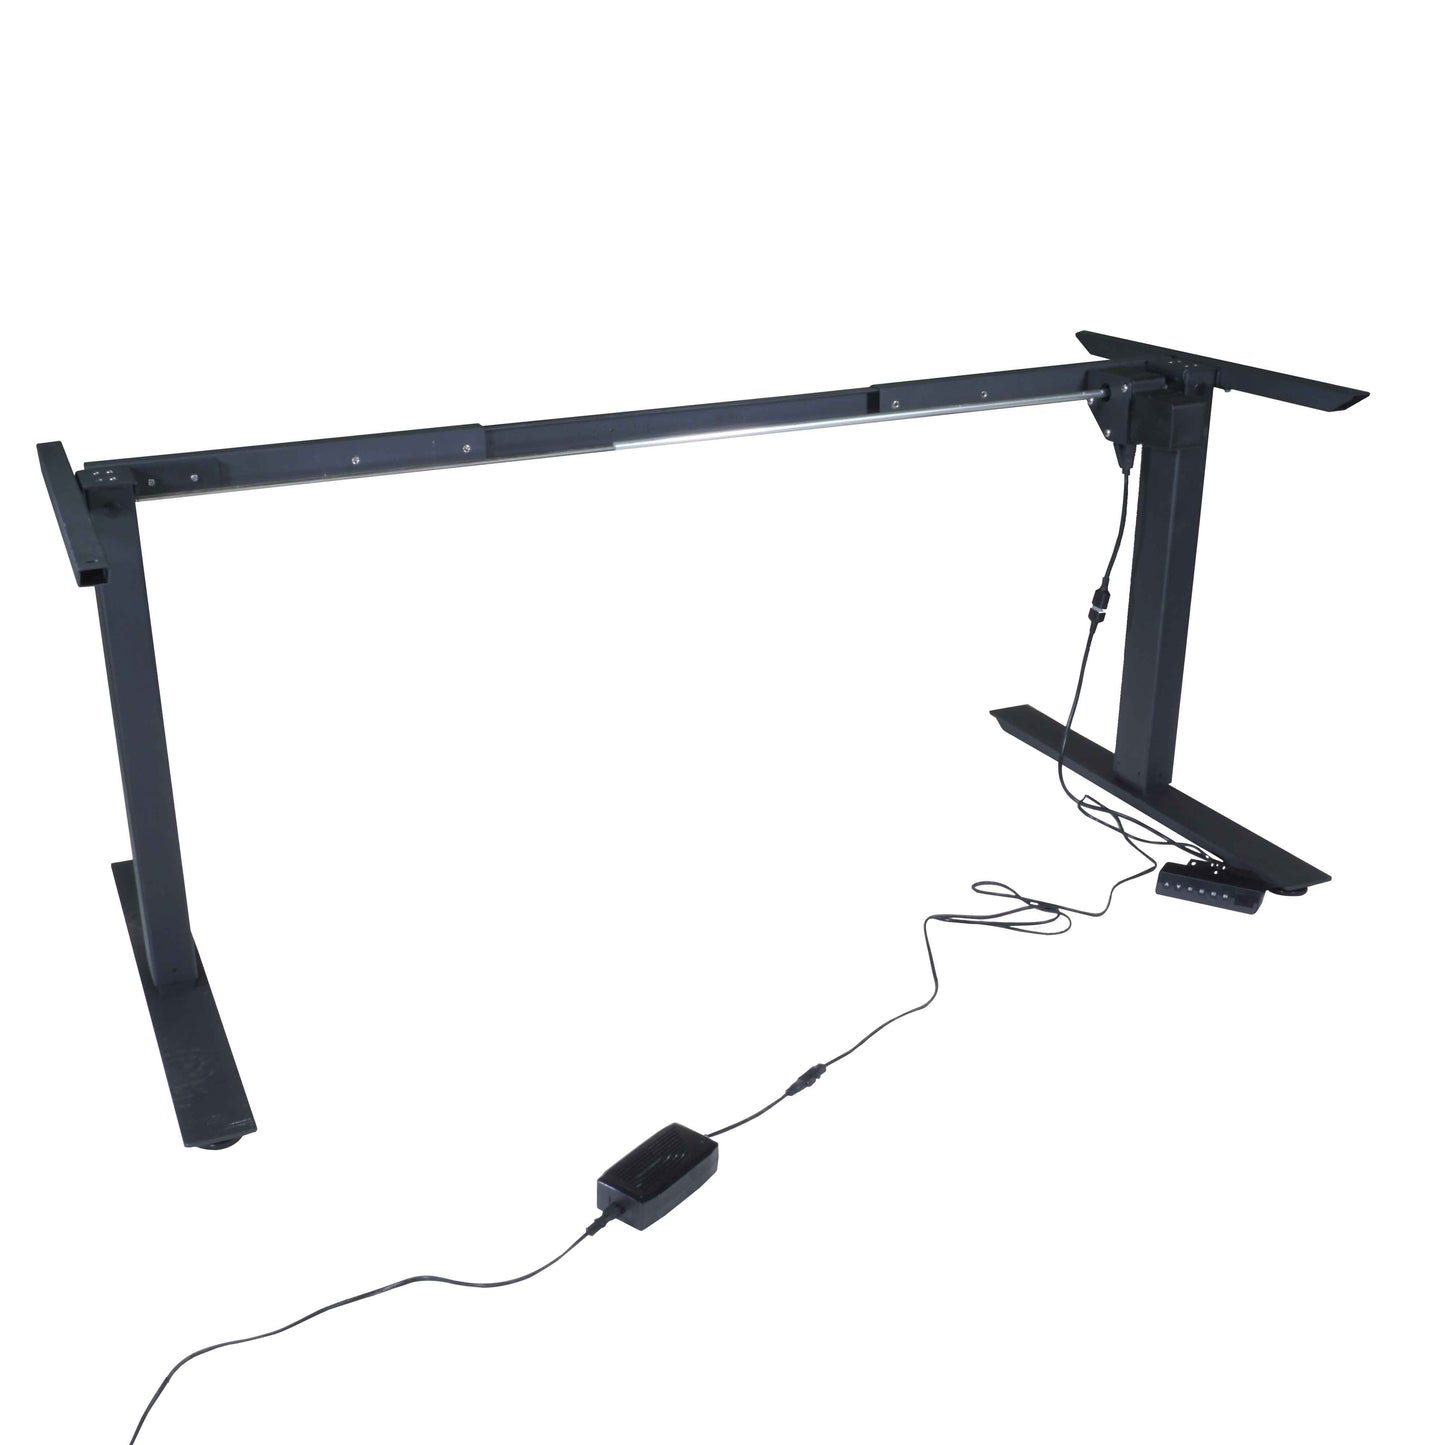 Single Motor Electric Adjustable Height A2 Sit-Stand Desk (Black) - view 6